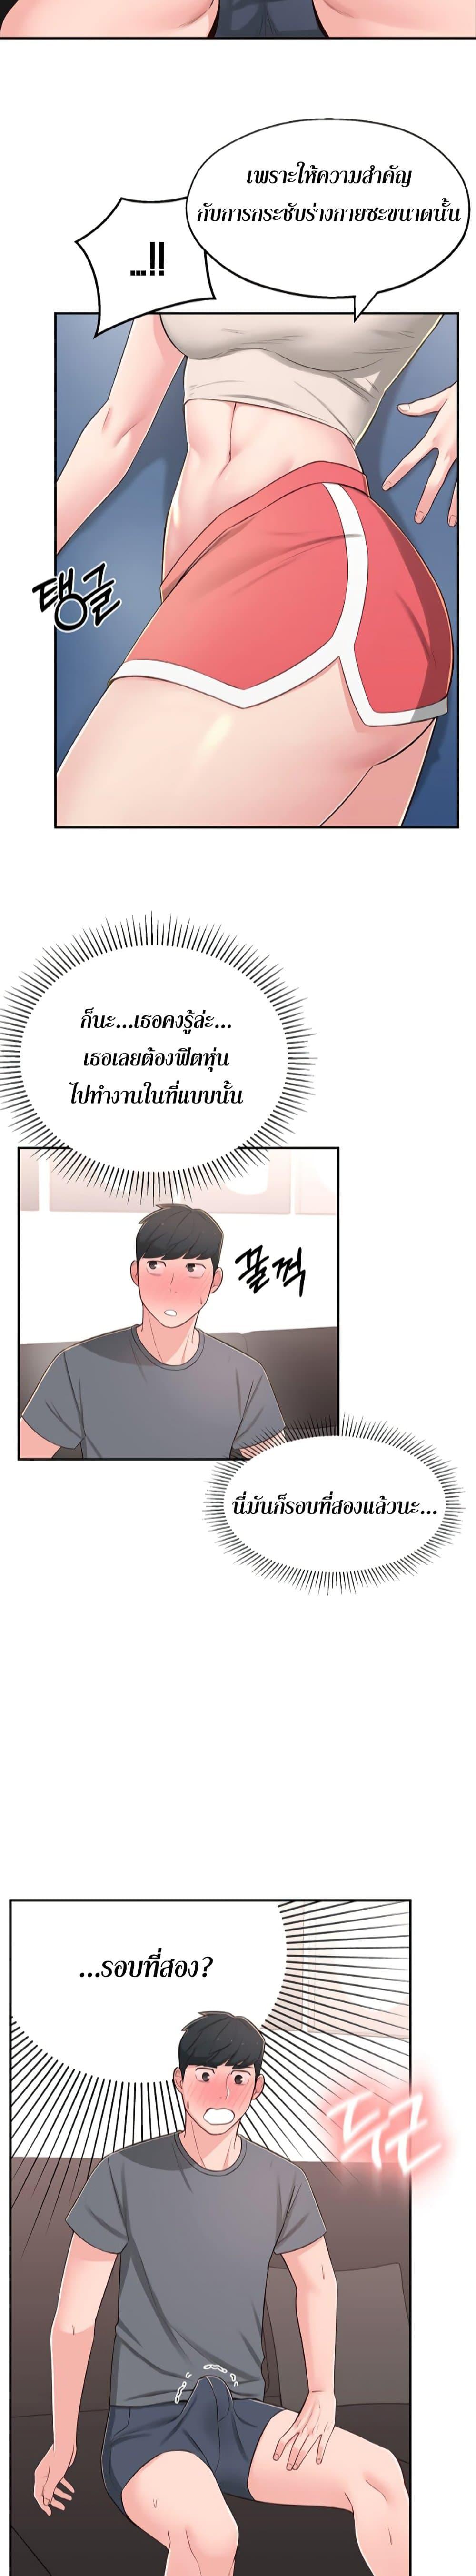 A Knowing Sister 7 ภาพ 19